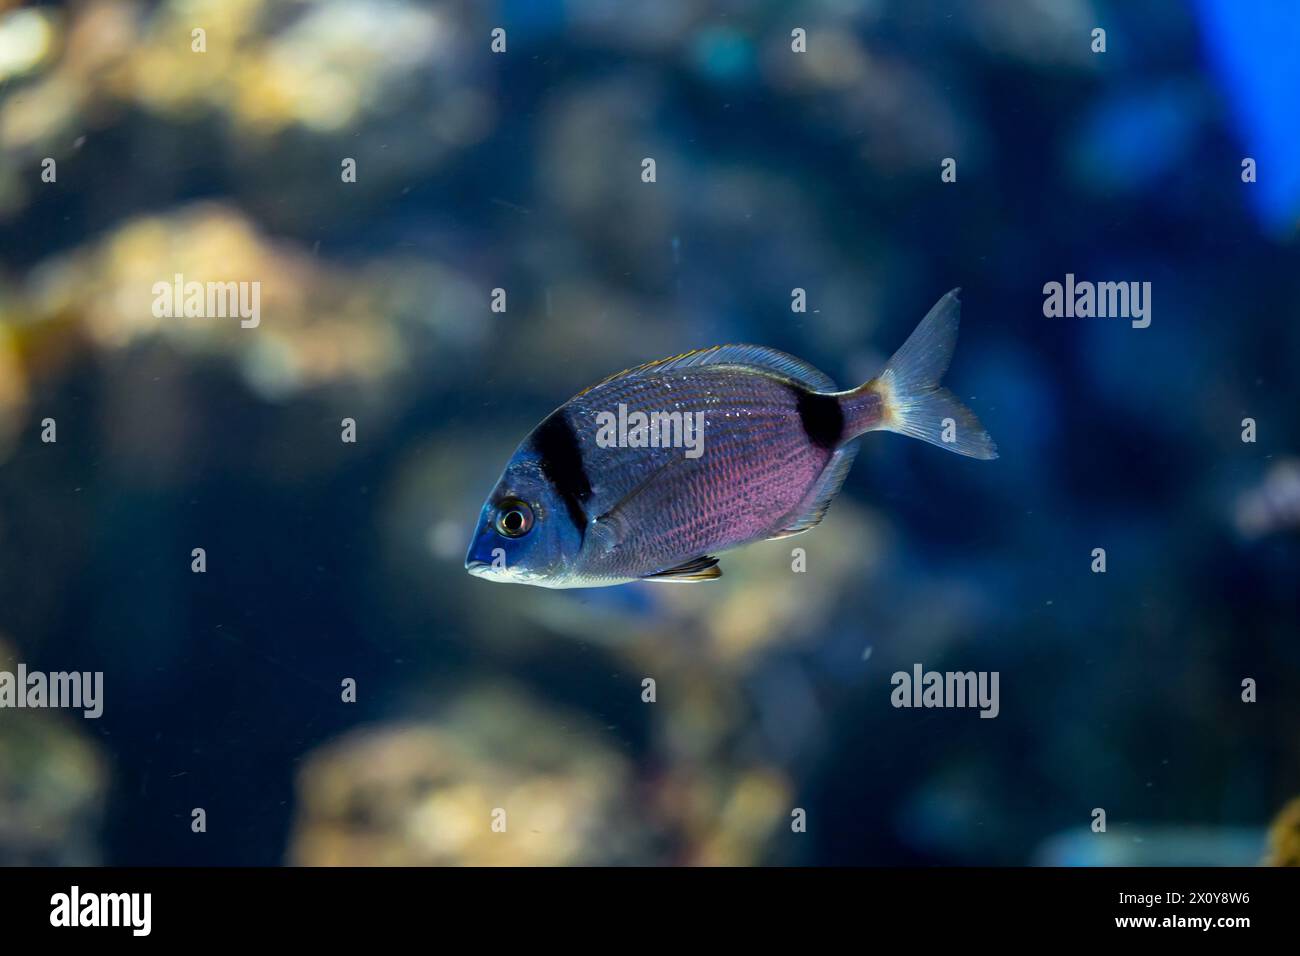 Electric blue fish with intricate fins swimming gracefully in an aquarium Stock Photo